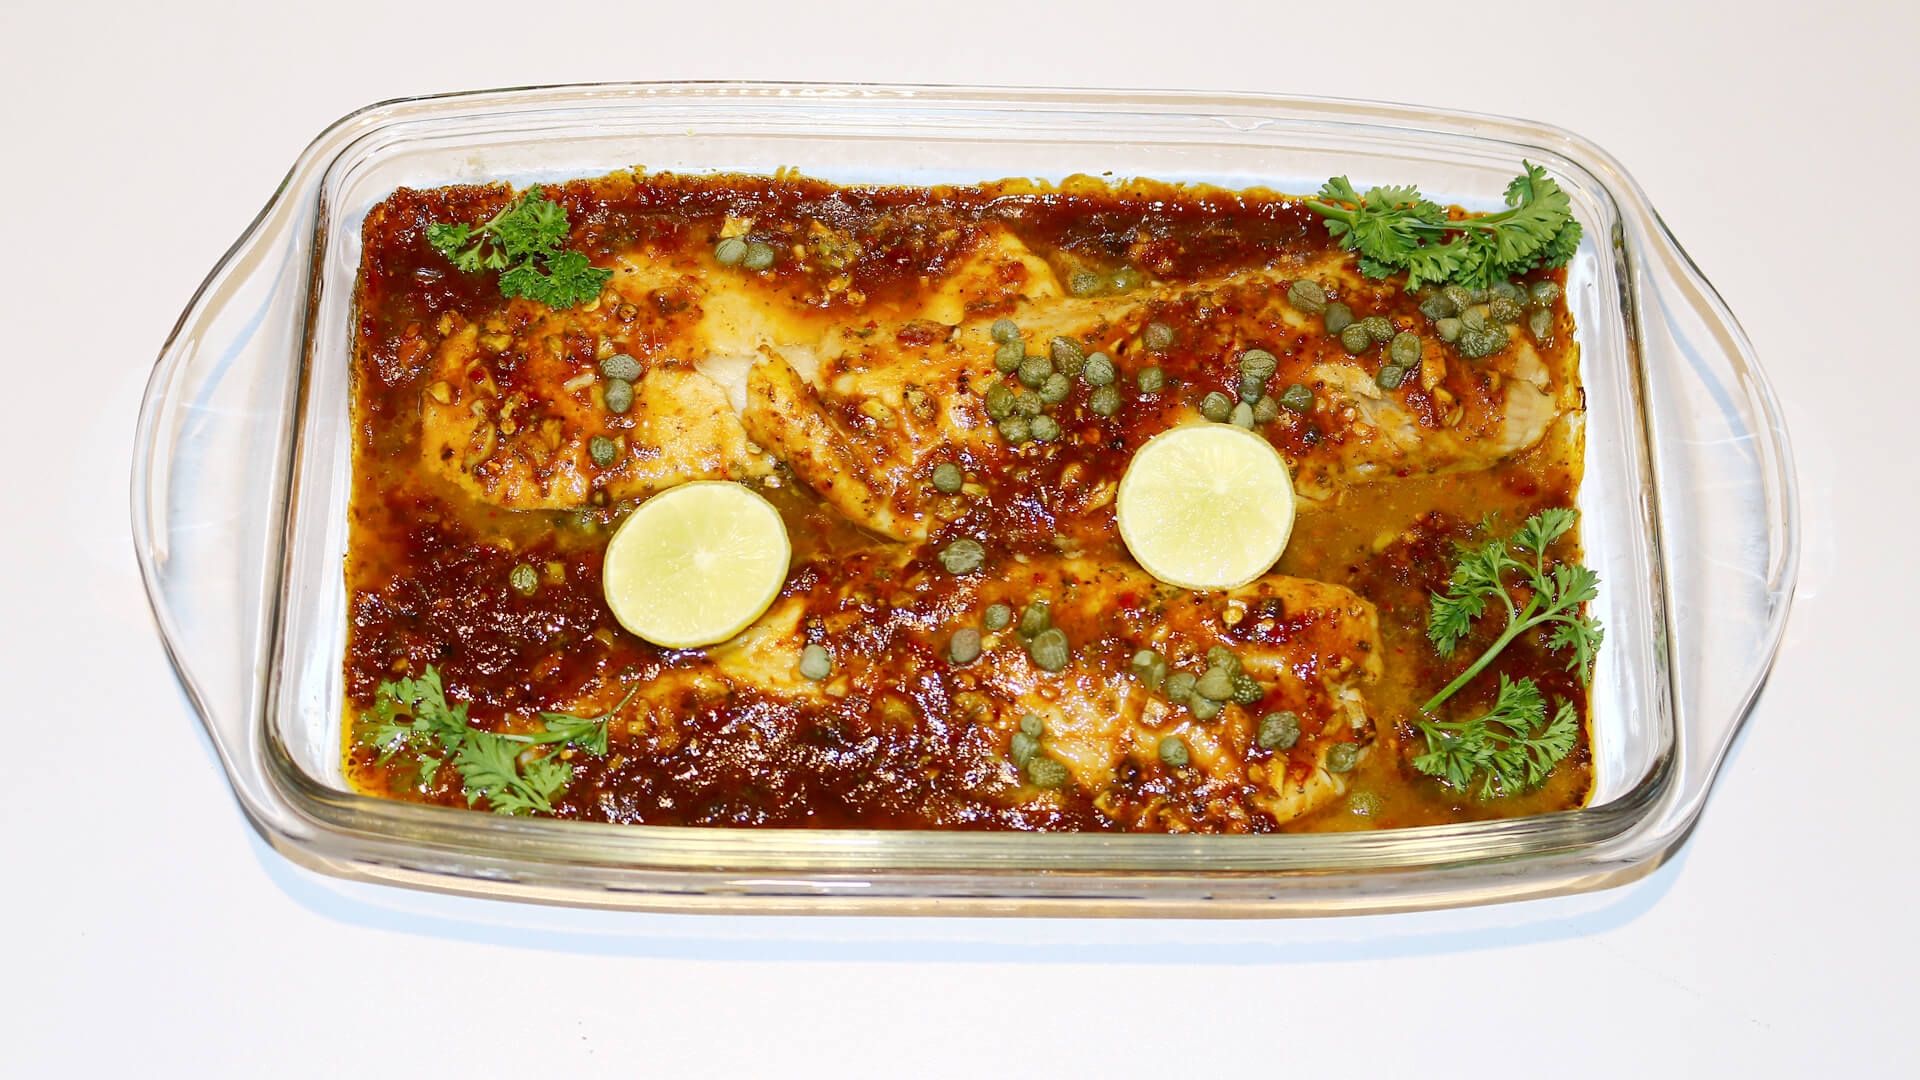 Spicy Fish Baked Recipe | Food Diaries